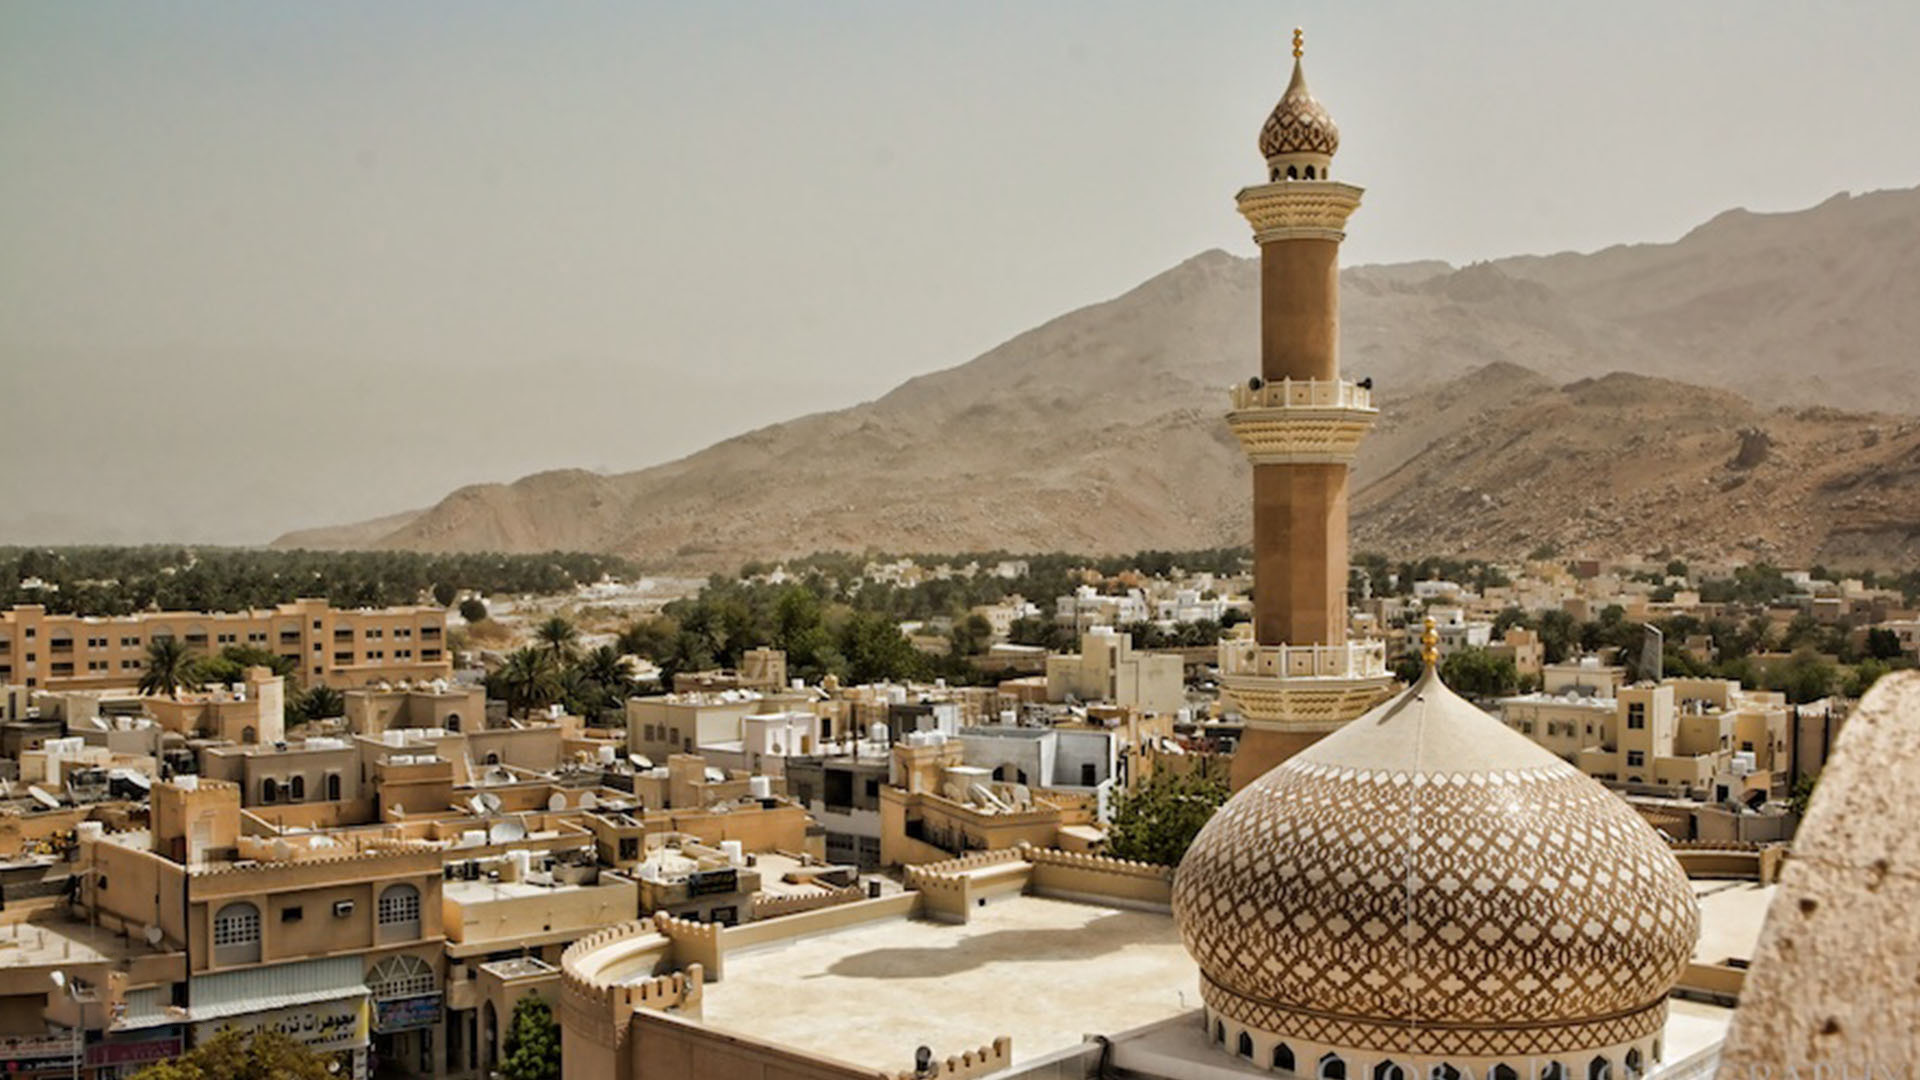 Nizwa: A panoramic photograph captures the majestic Grand Mosque of Nizwa, embraced by a scenic setting of houses and mountains.